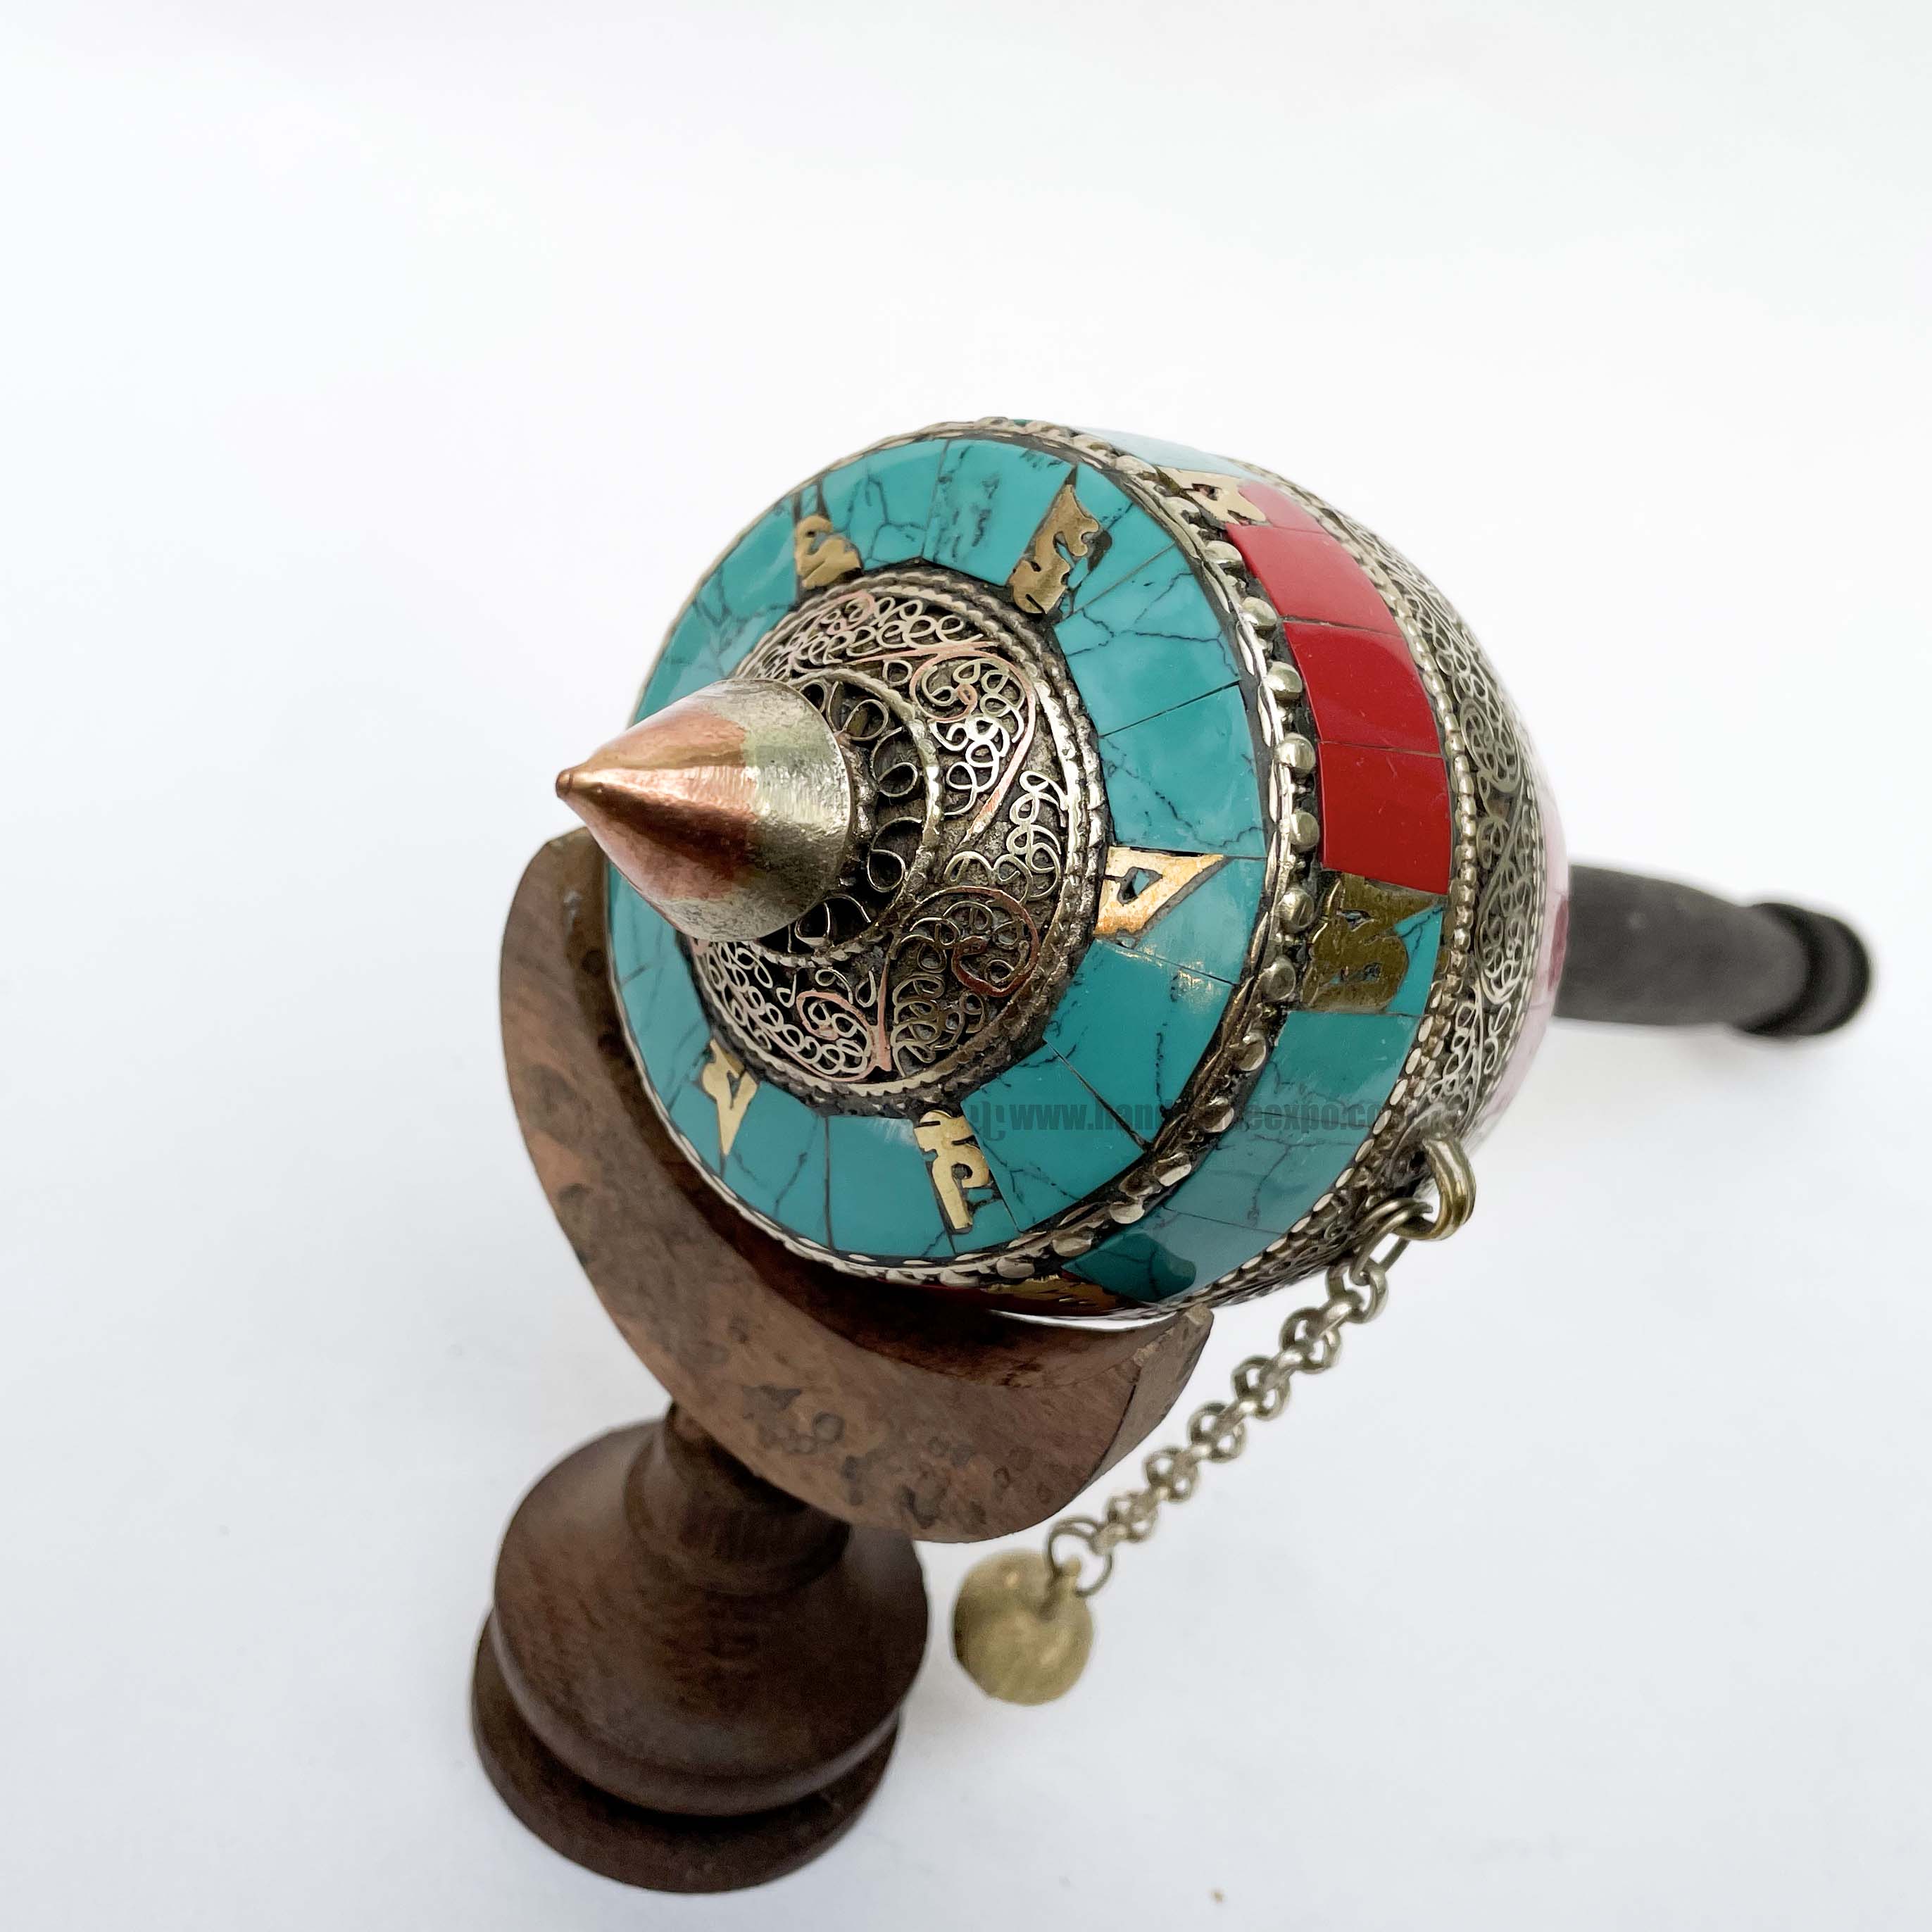 Brass Hand Held With Mantra Prayer Wheel, blue And Red Color